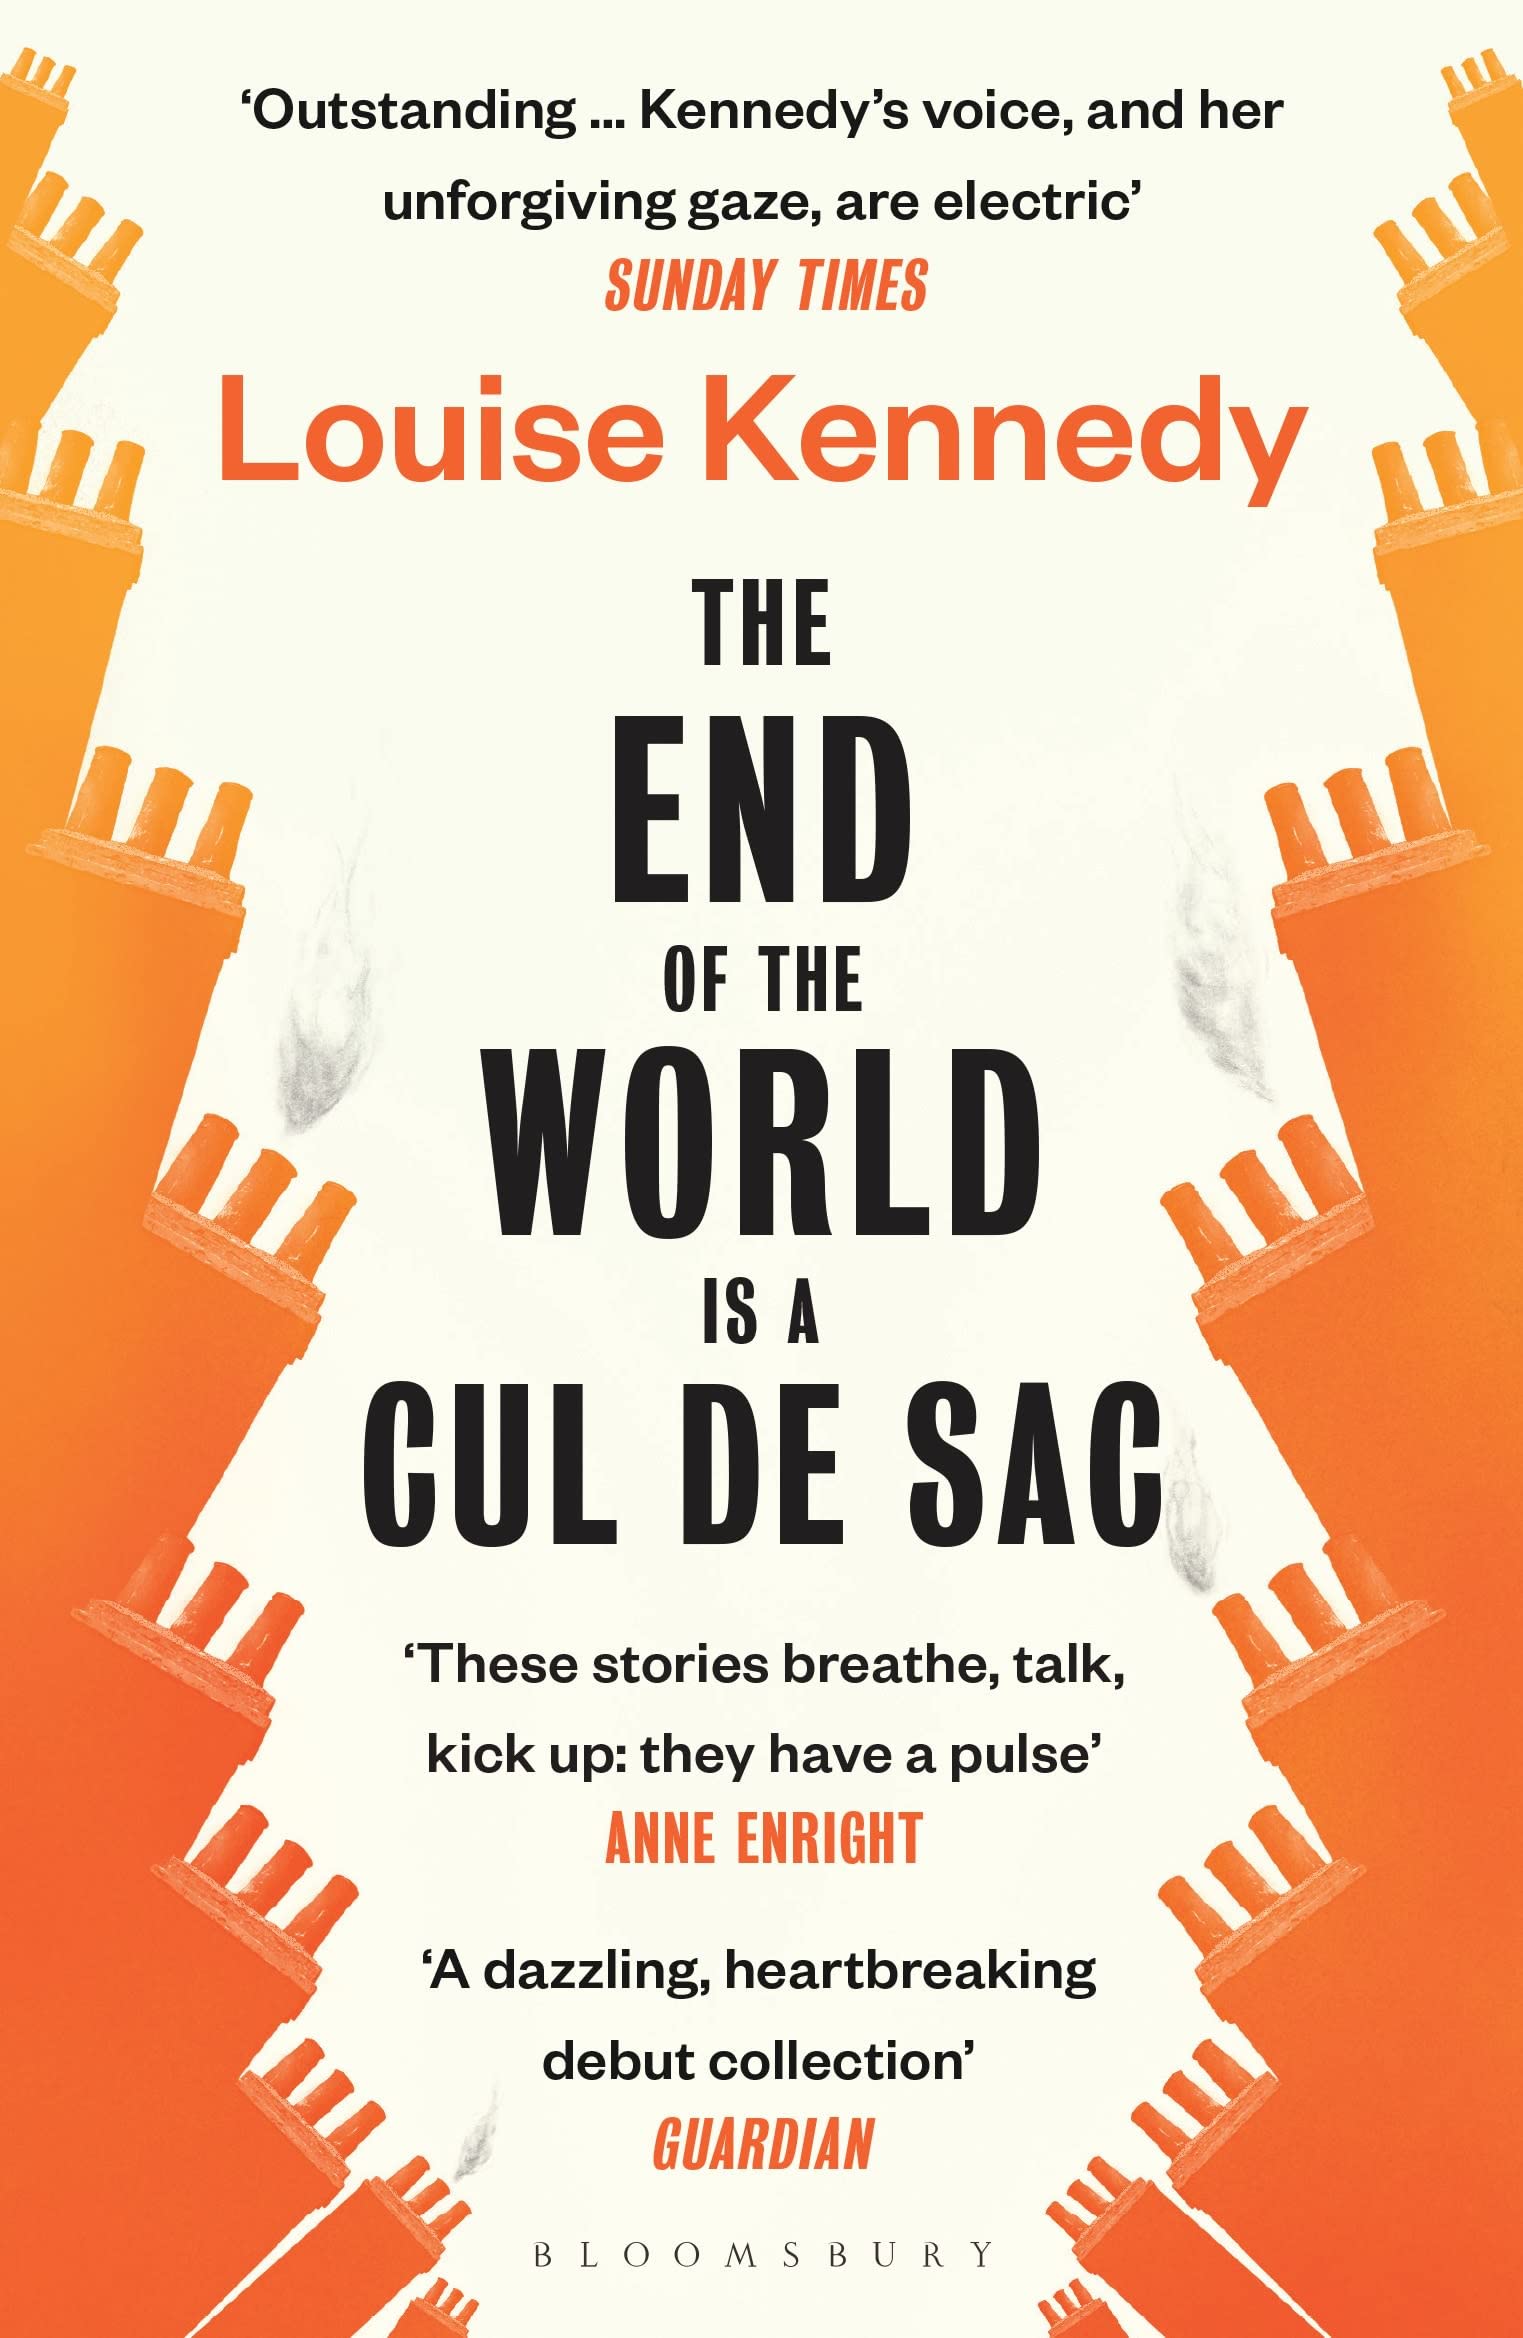 The End of the World is a Cul de Sac | Louise Kennedy | Charlie Byrne's